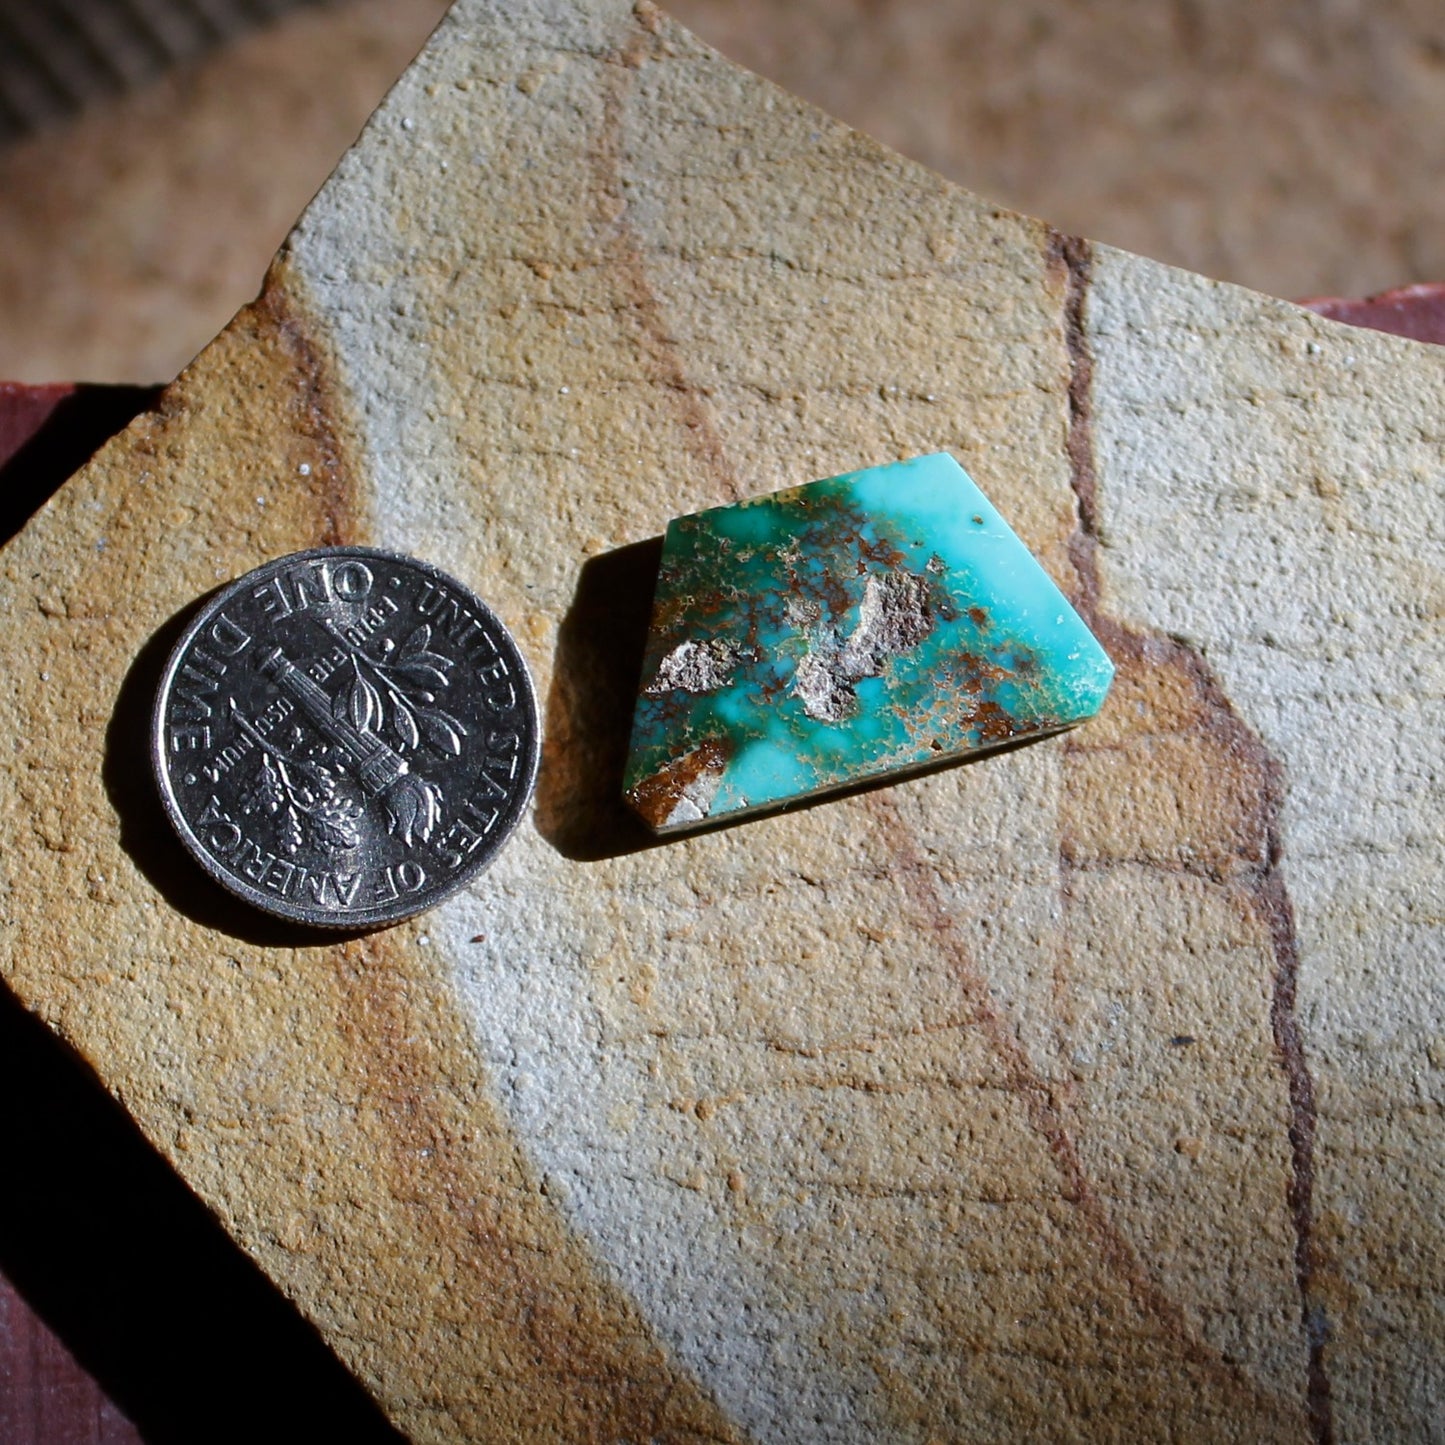 9.6 carat angular blue Stone Mountain Turquoise cabochon with red matrix